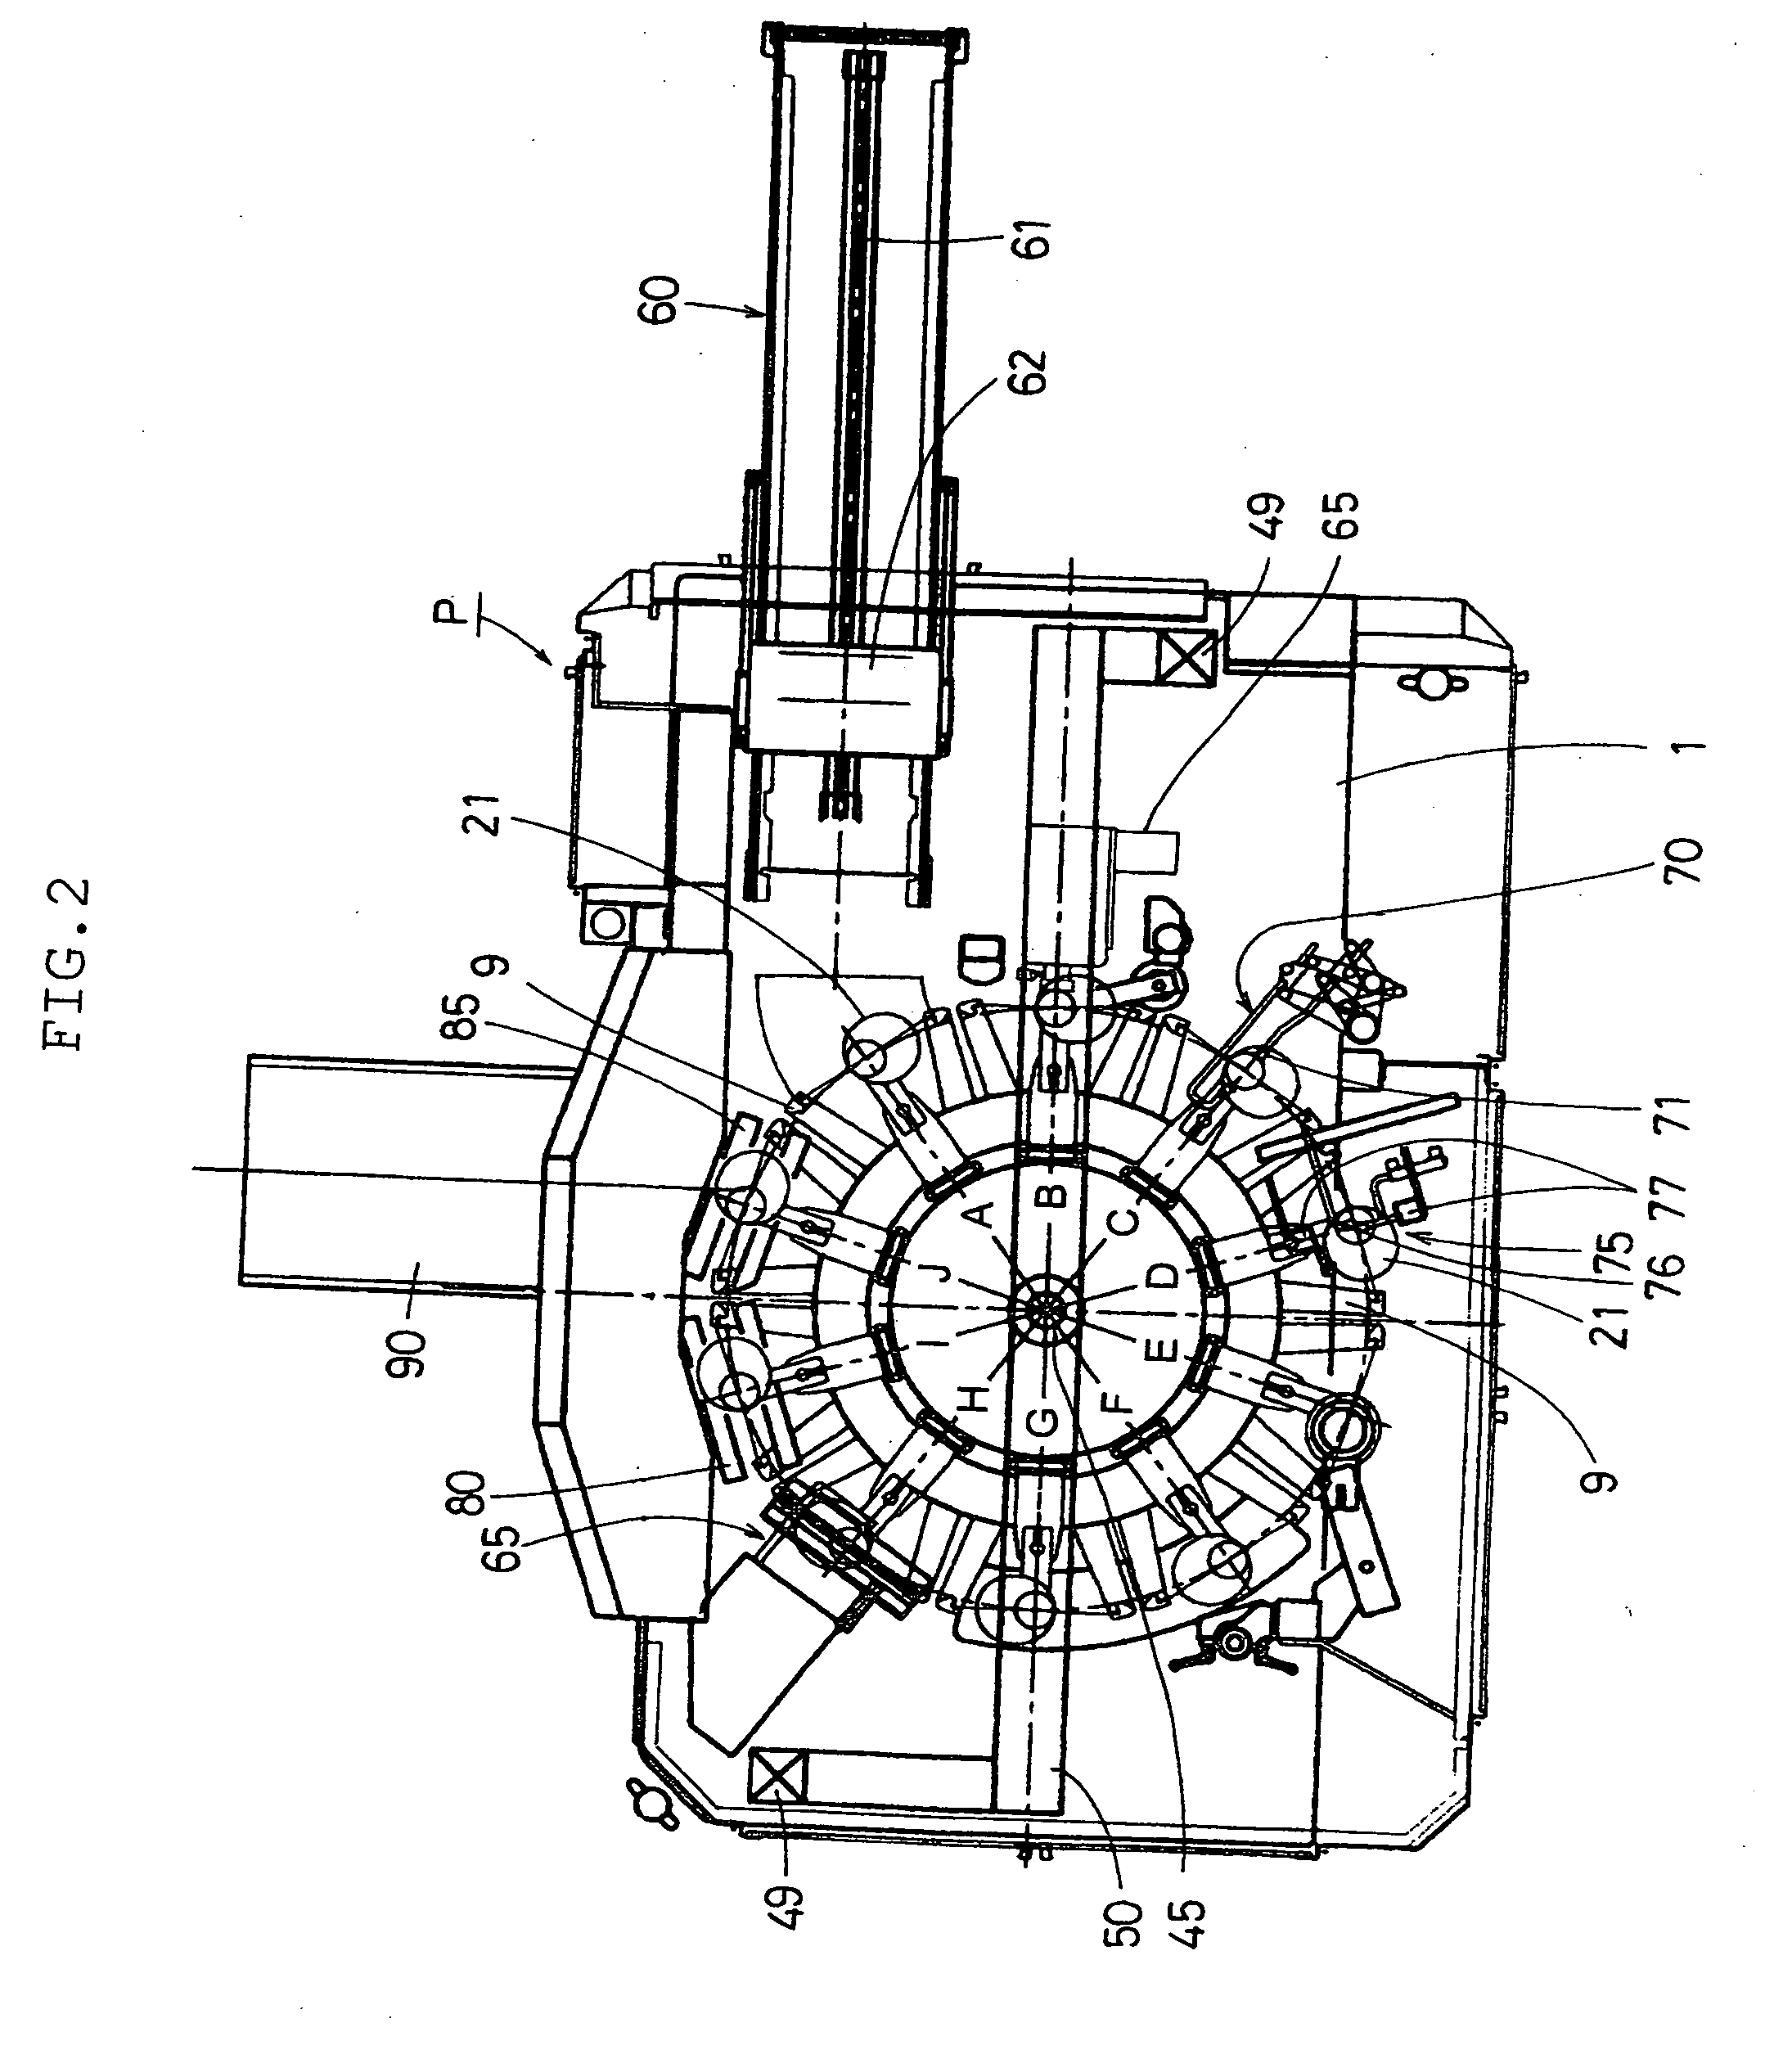 Method for Placing Inert Gas in Gas-Filling Packaging Machine